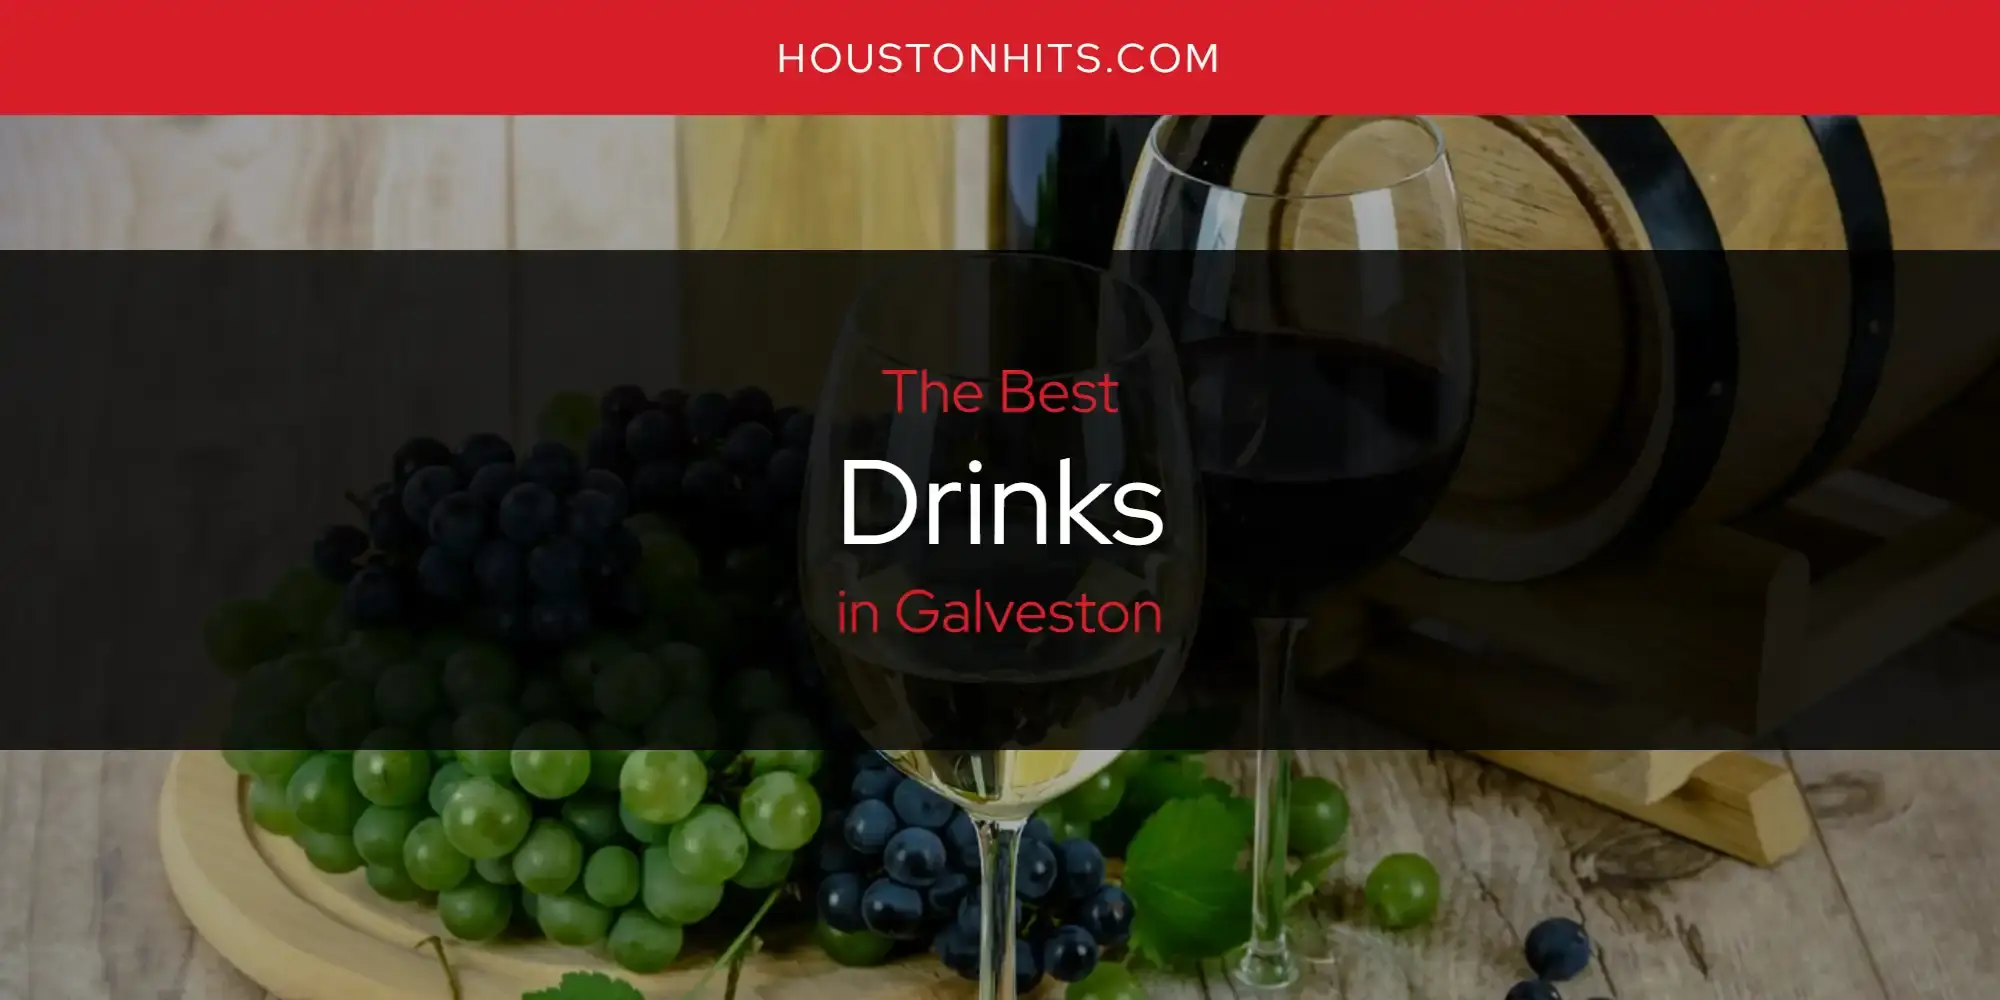 Best Drinks in Galveston? Here's the Top 17